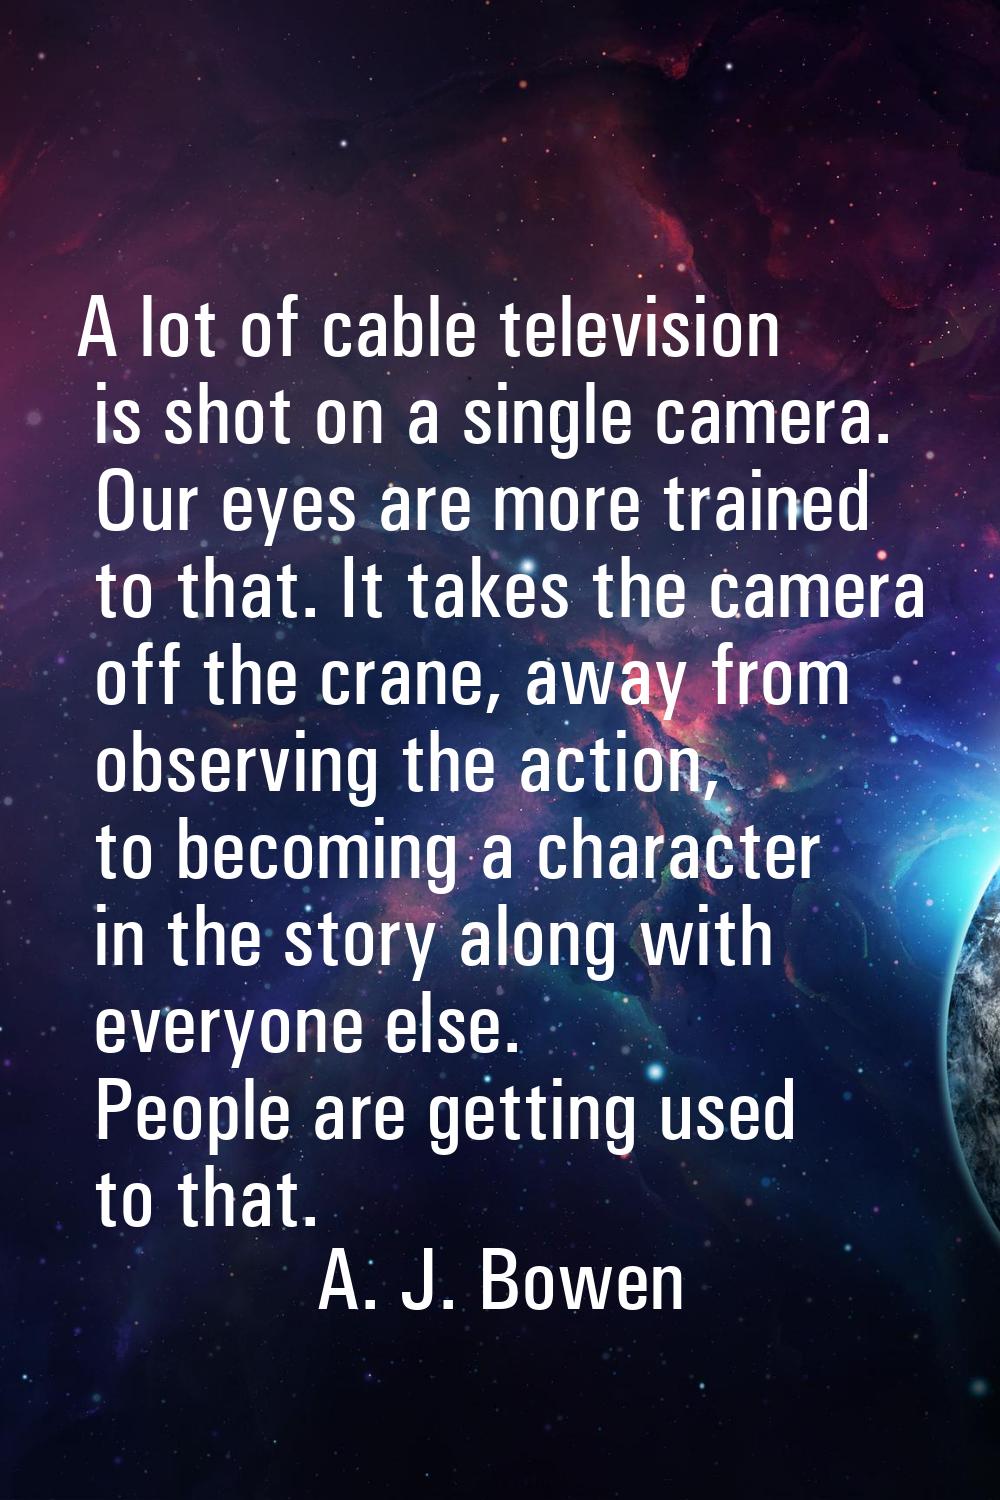 A lot of cable television is shot on a single camera. Our eyes are more trained to that. It takes t